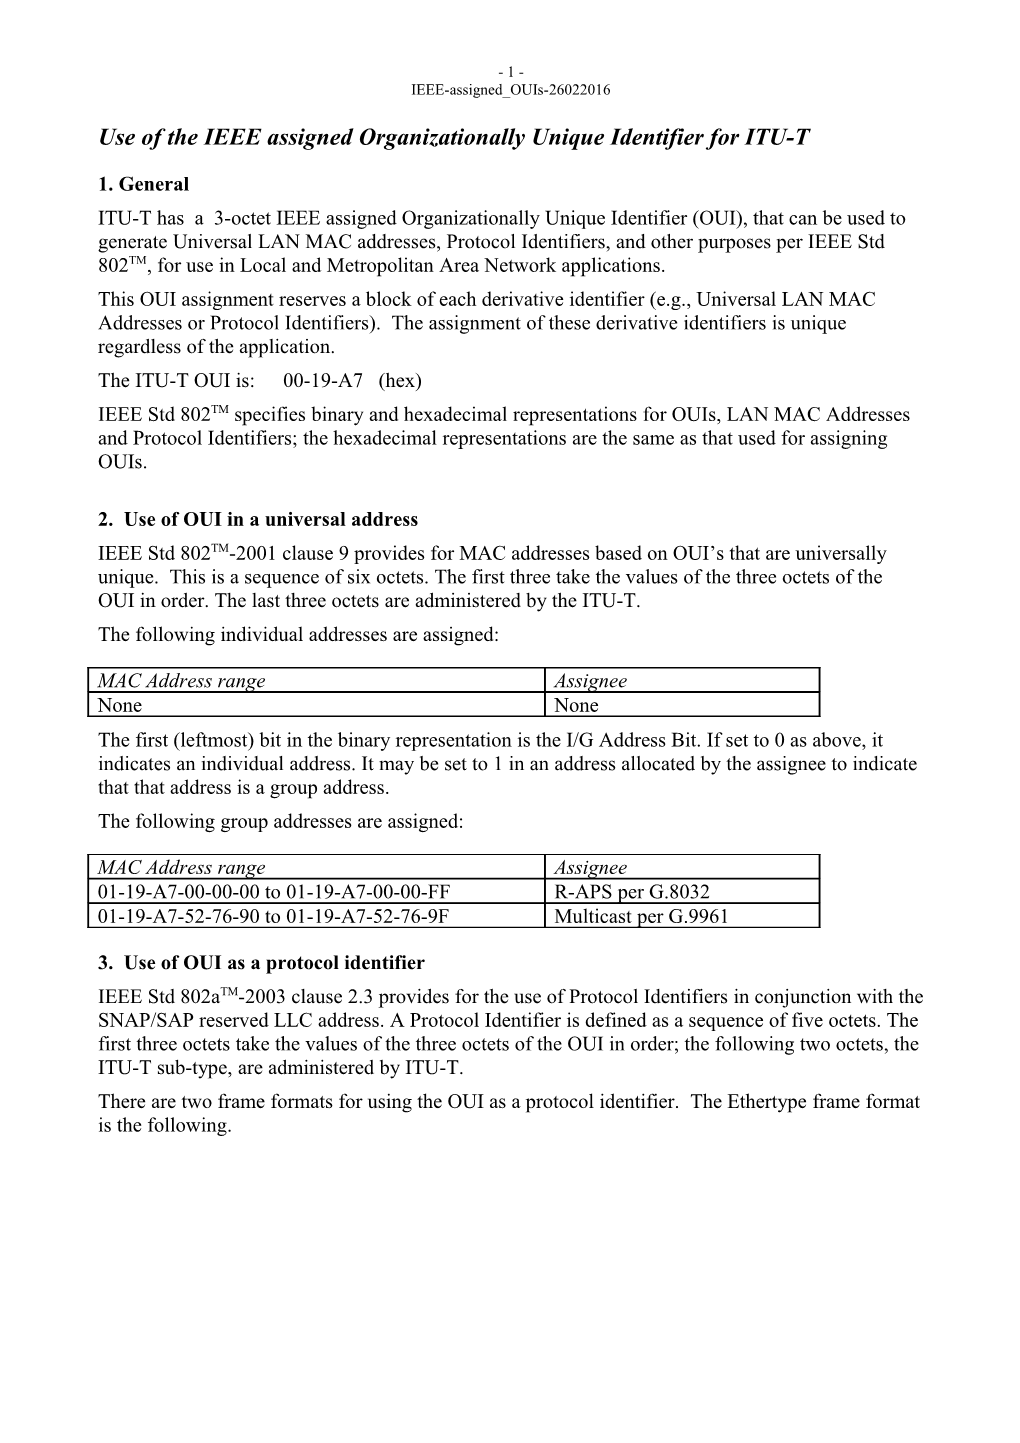 Update to IEEE-Assigned Ouis for ITU-T